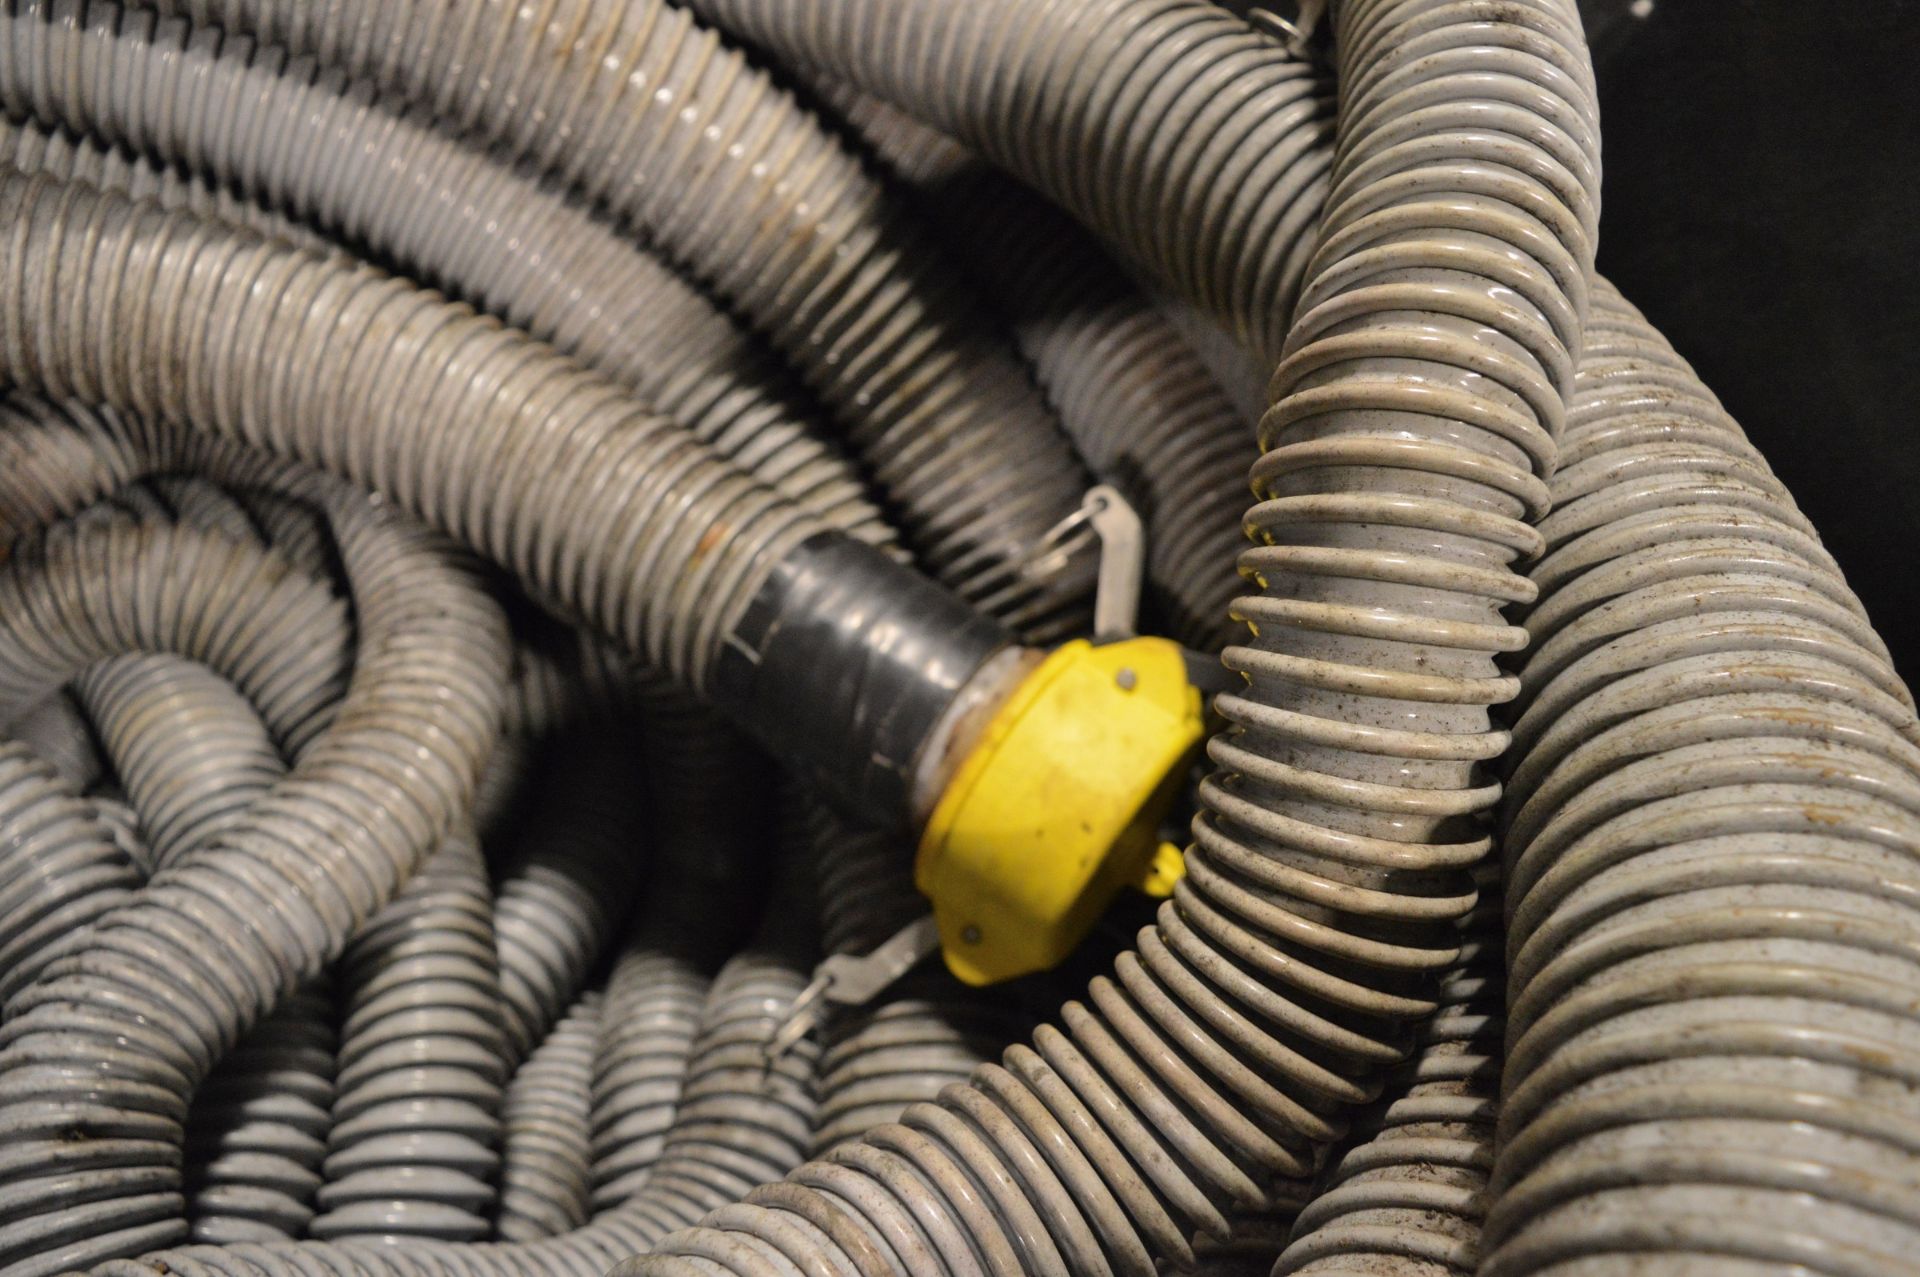 3" Flexible Hose - unknown length - Image 3 of 3